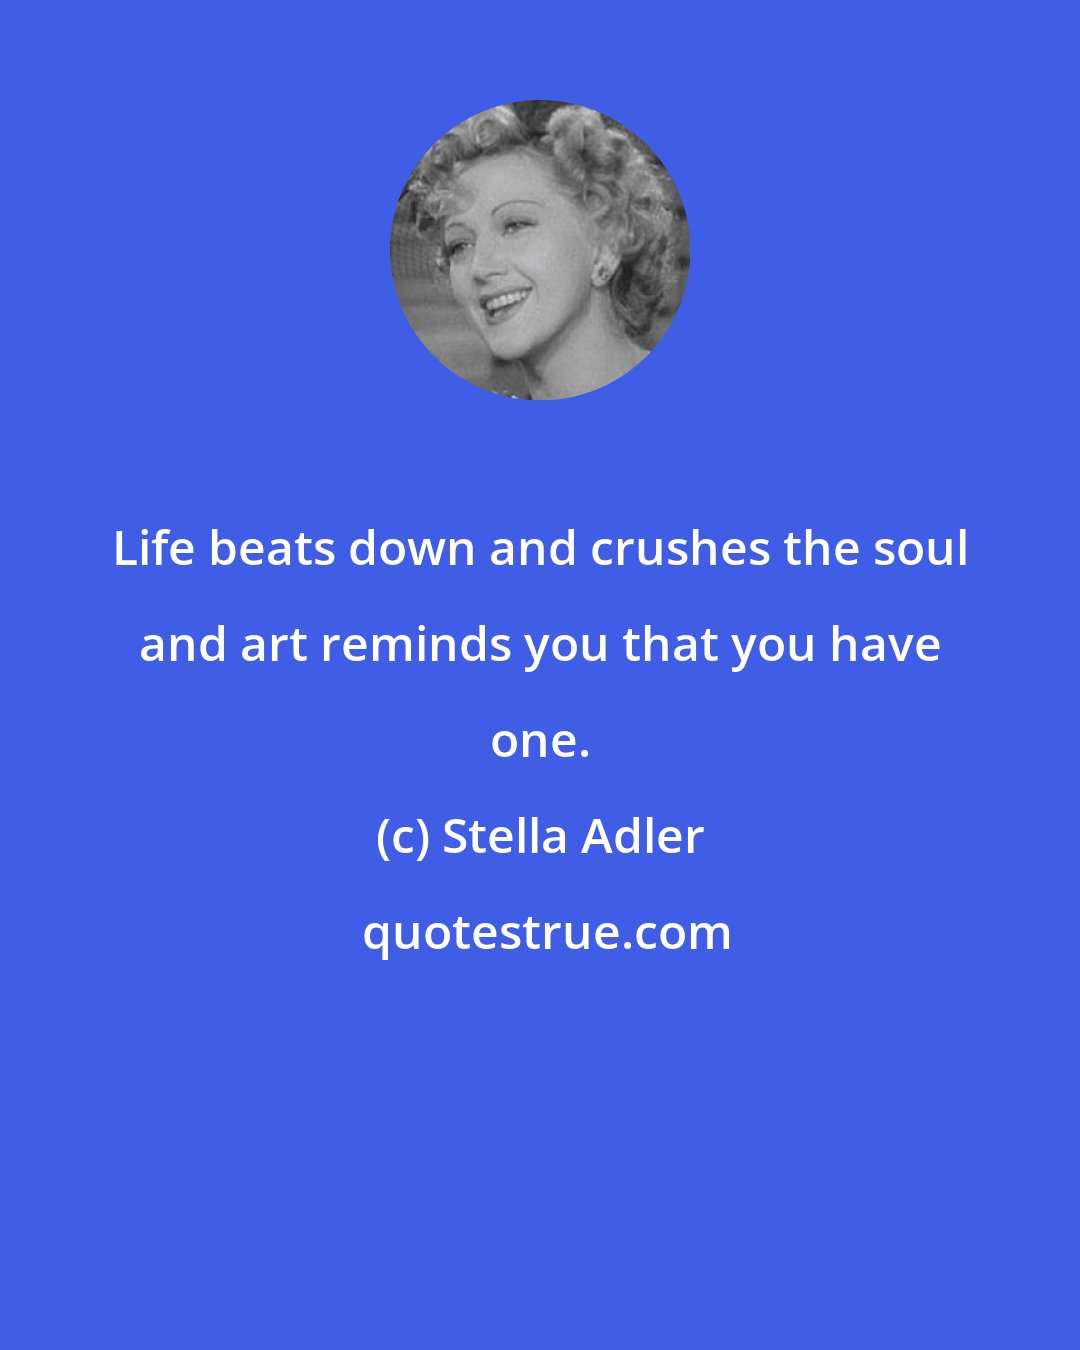 Stella Adler: Life beats down and crushes the soul and art reminds you that you have one.